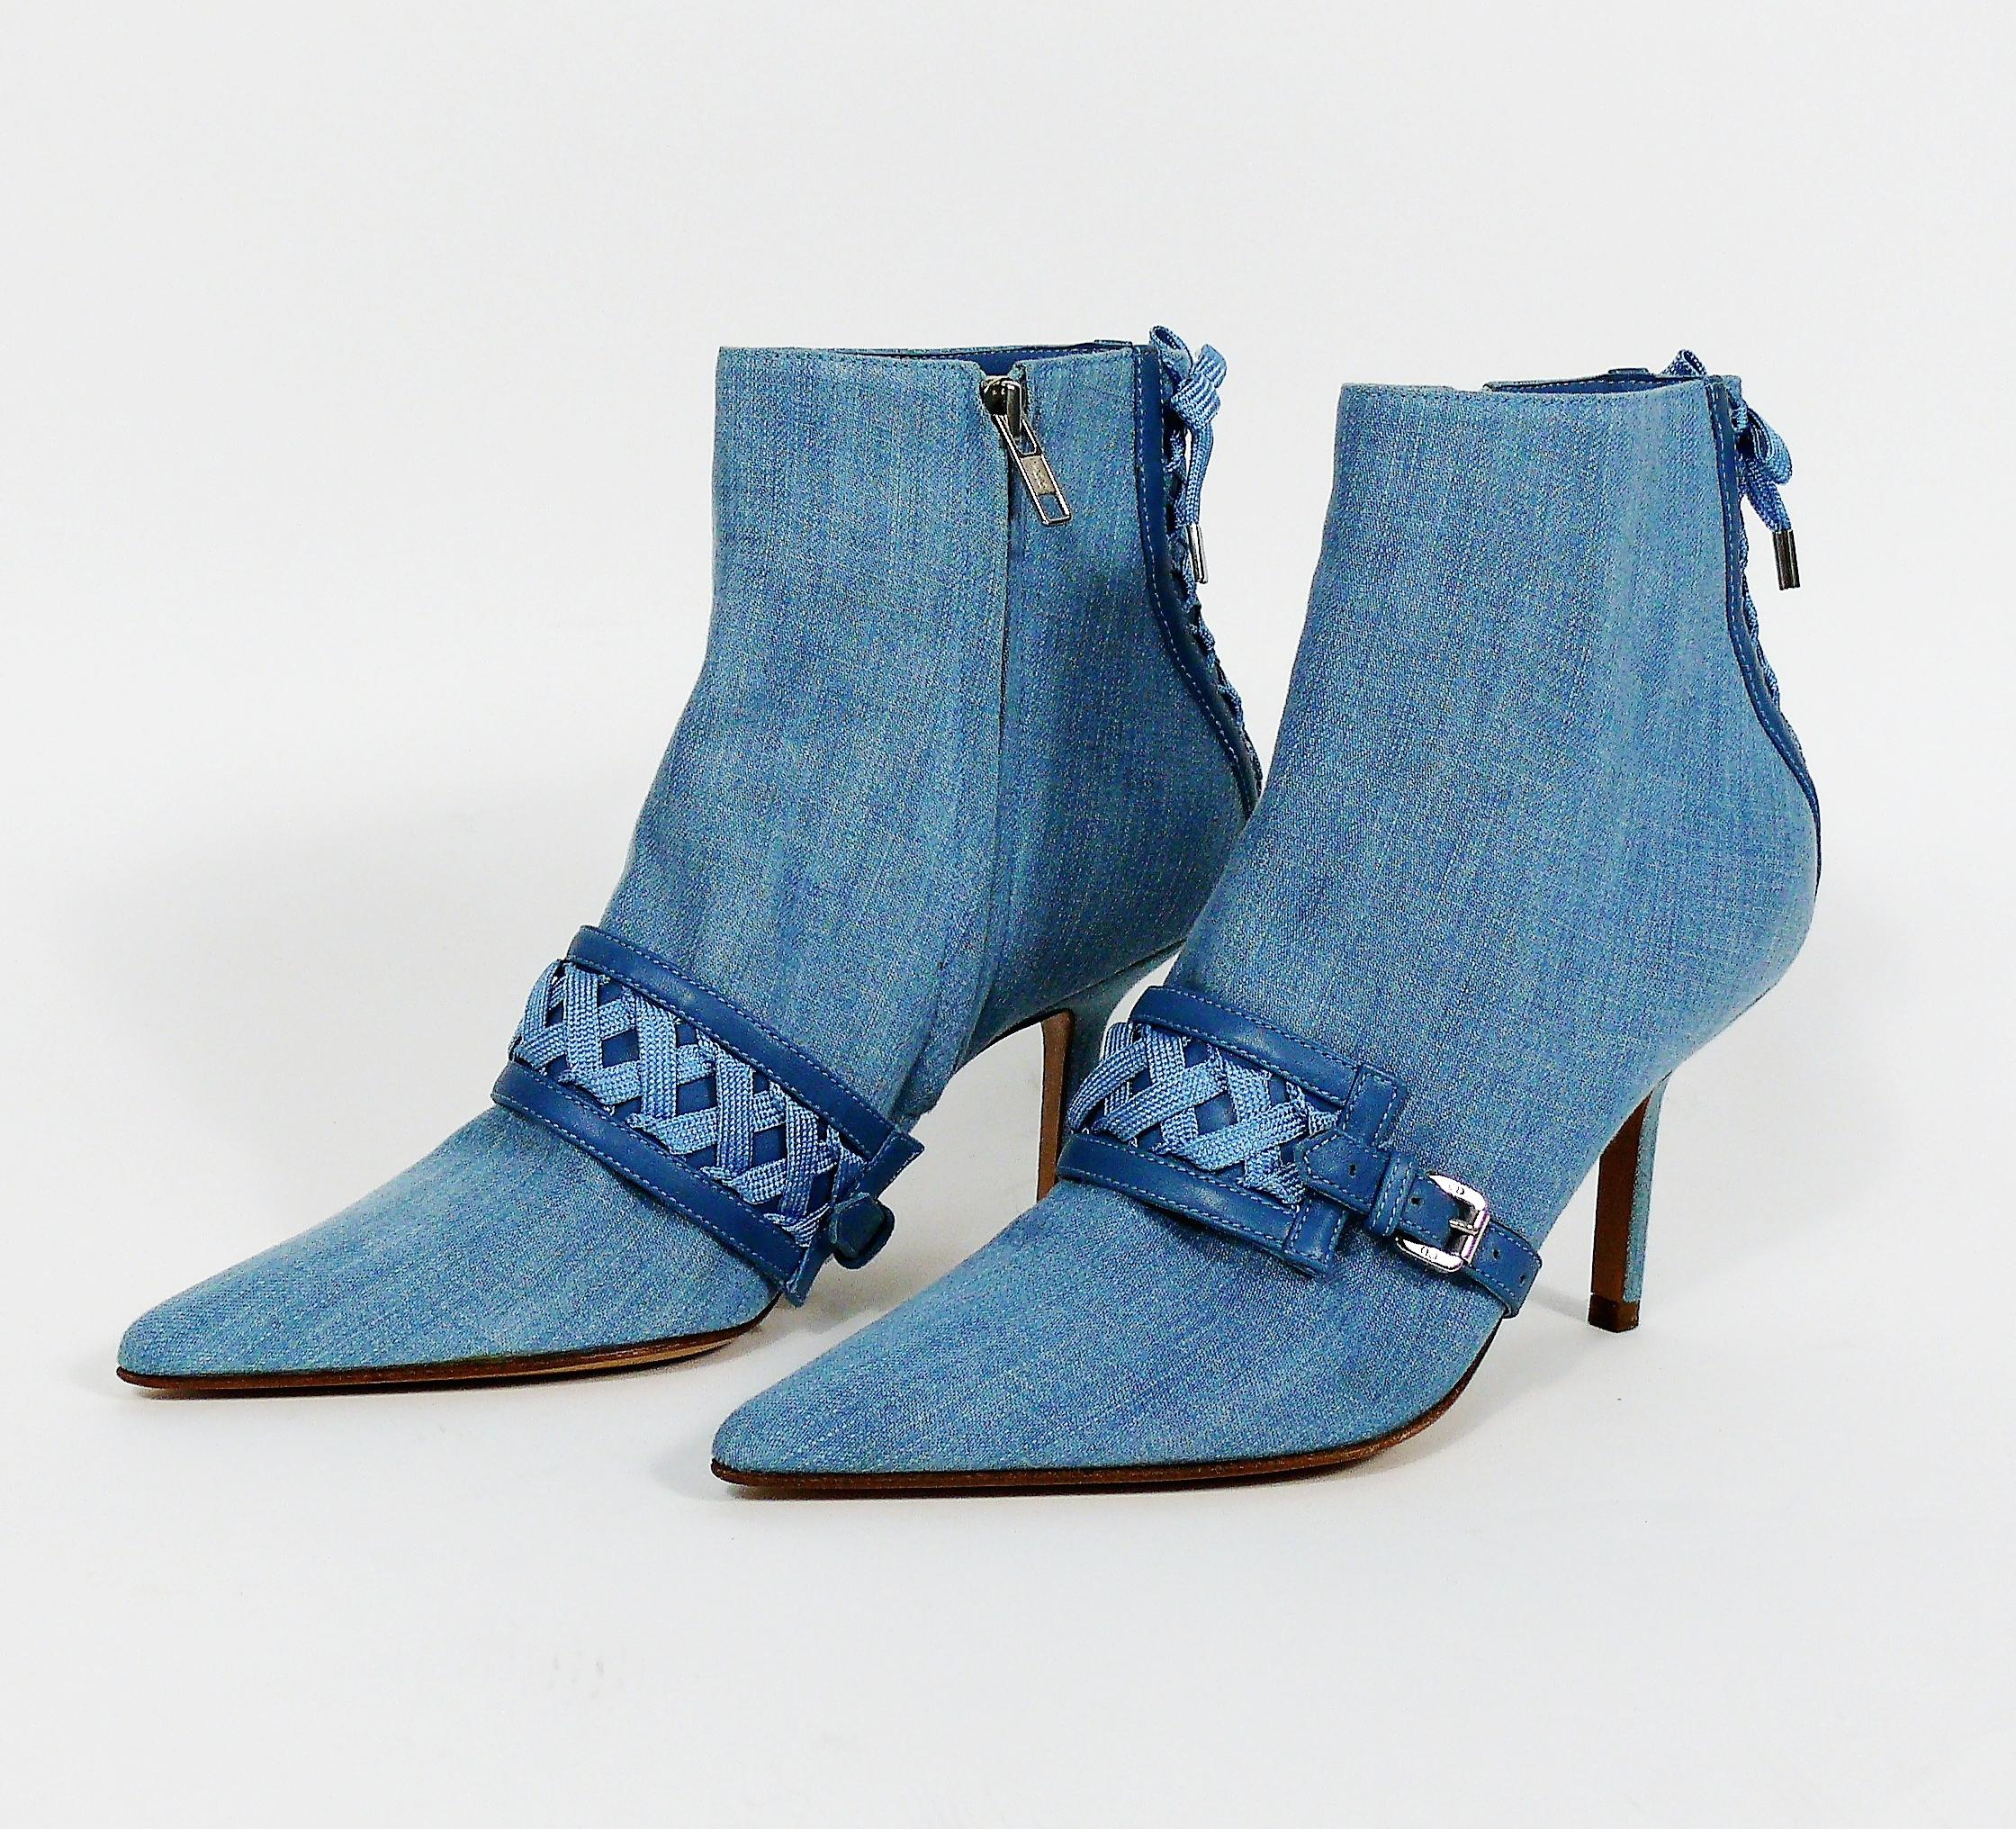 CHRISTIAN DIOR light denim ADMIT IT corset ankle boots featuring corset like details on the back and across the body.

Embossed DIOR.
Made in Italy.

Indicated size : 37 1/2 C.

Please note that true blue colors shown on the photos are slightly